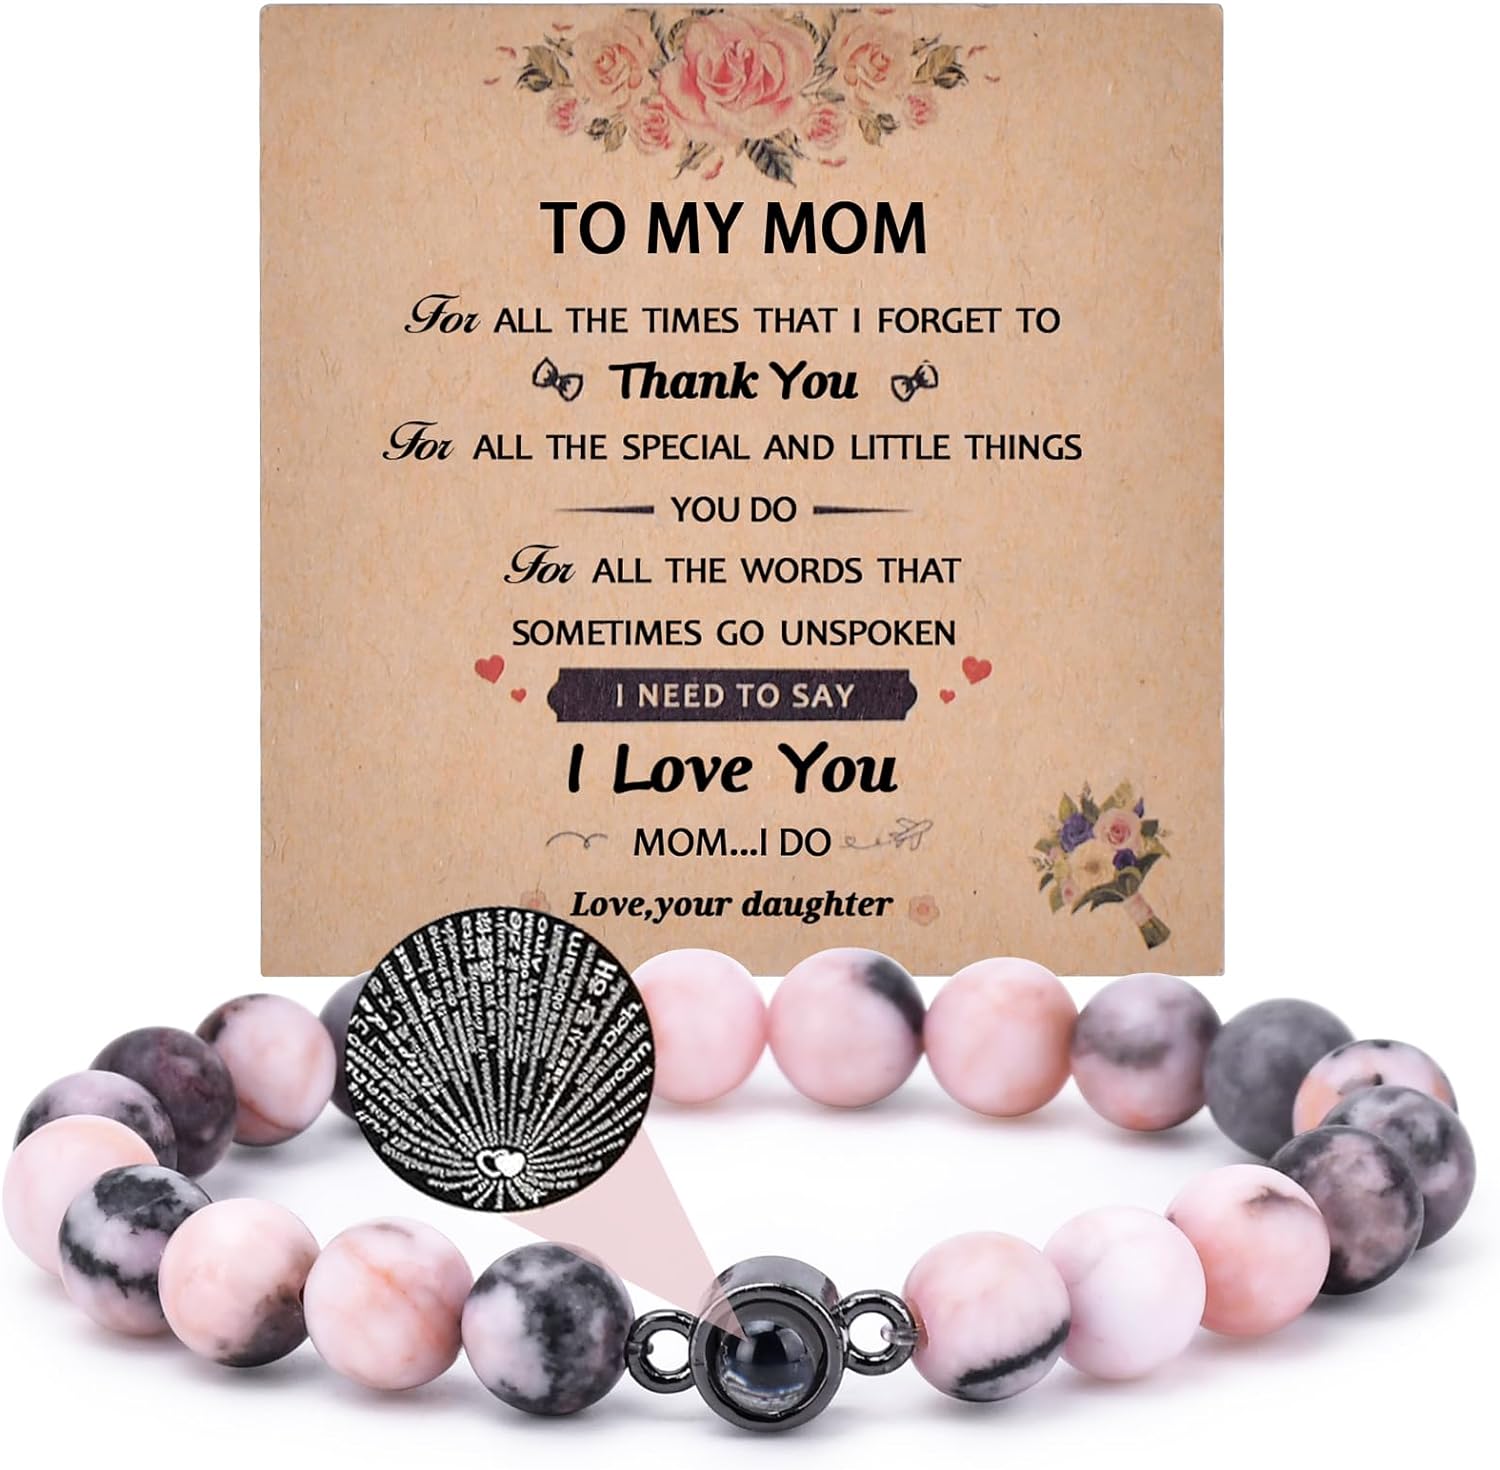 Mothers Day Gifts From Daughter Birthday Gifts For Mom Gifts Moonstone Bracelet I Love You 100 Languages Bracelets Gifts For Grandma Women Mothers Day Mom Gifts